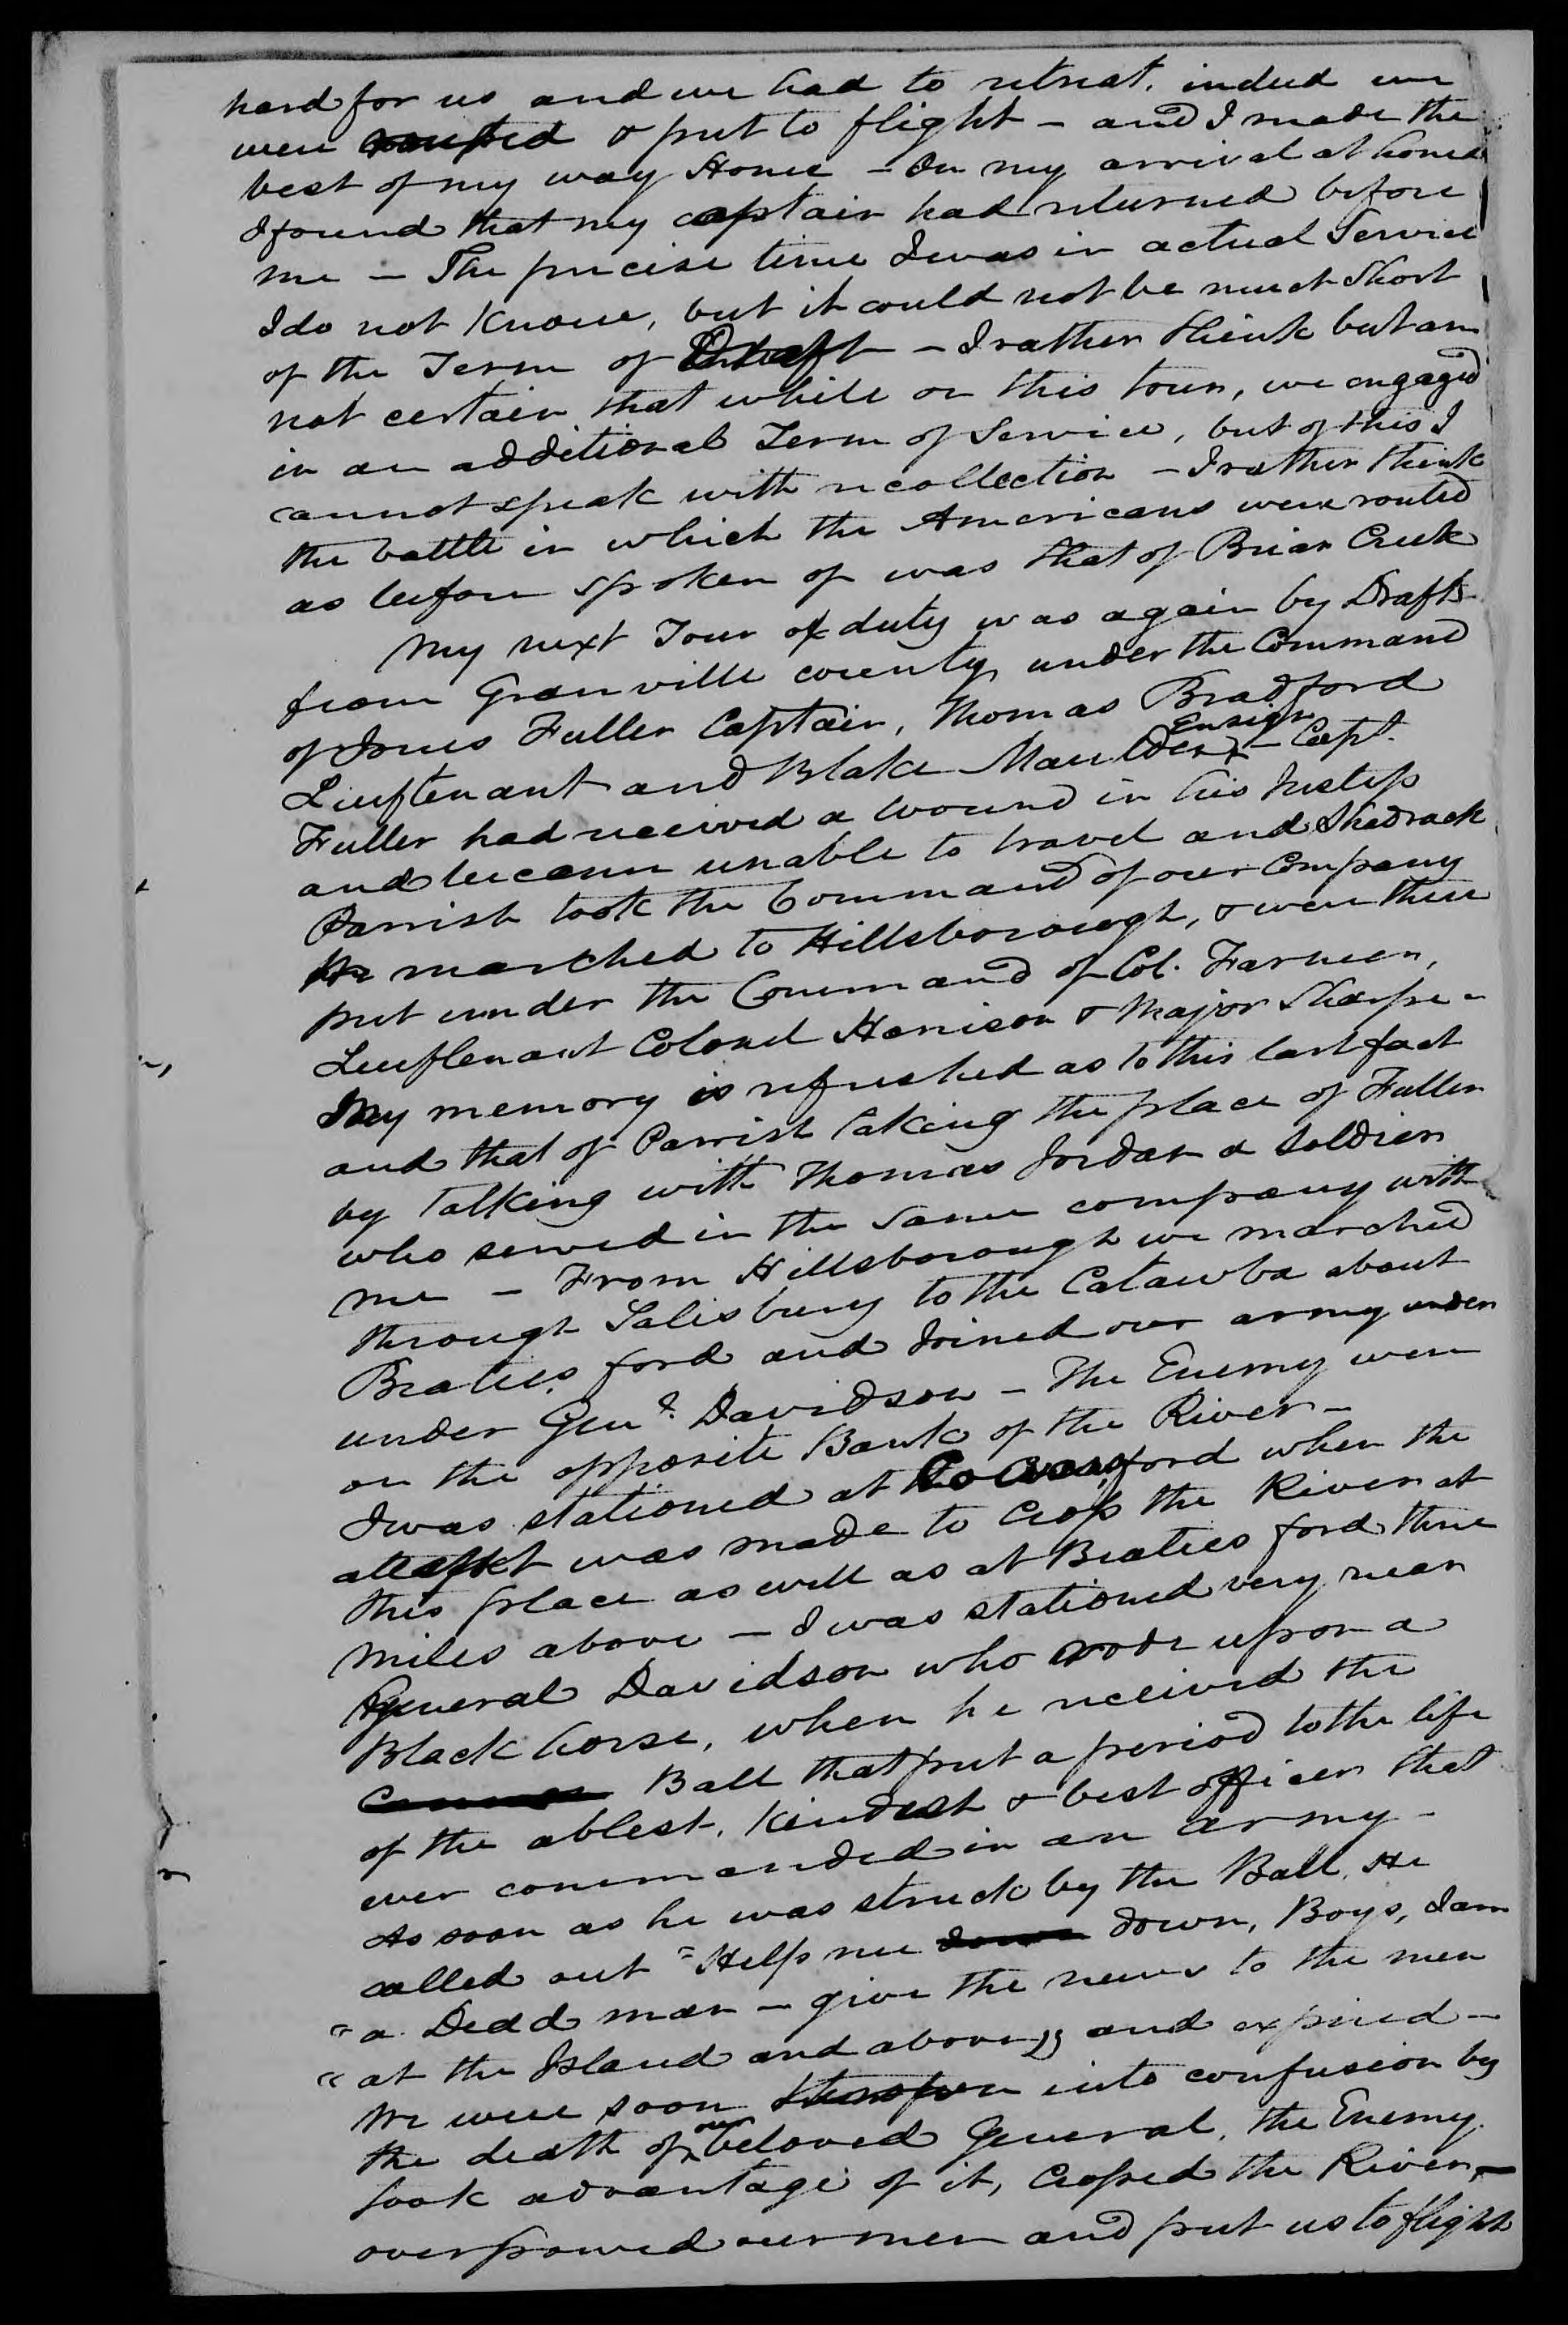 Application for a Veteran's Pension from William Taburn, 10 August 1832, page 3